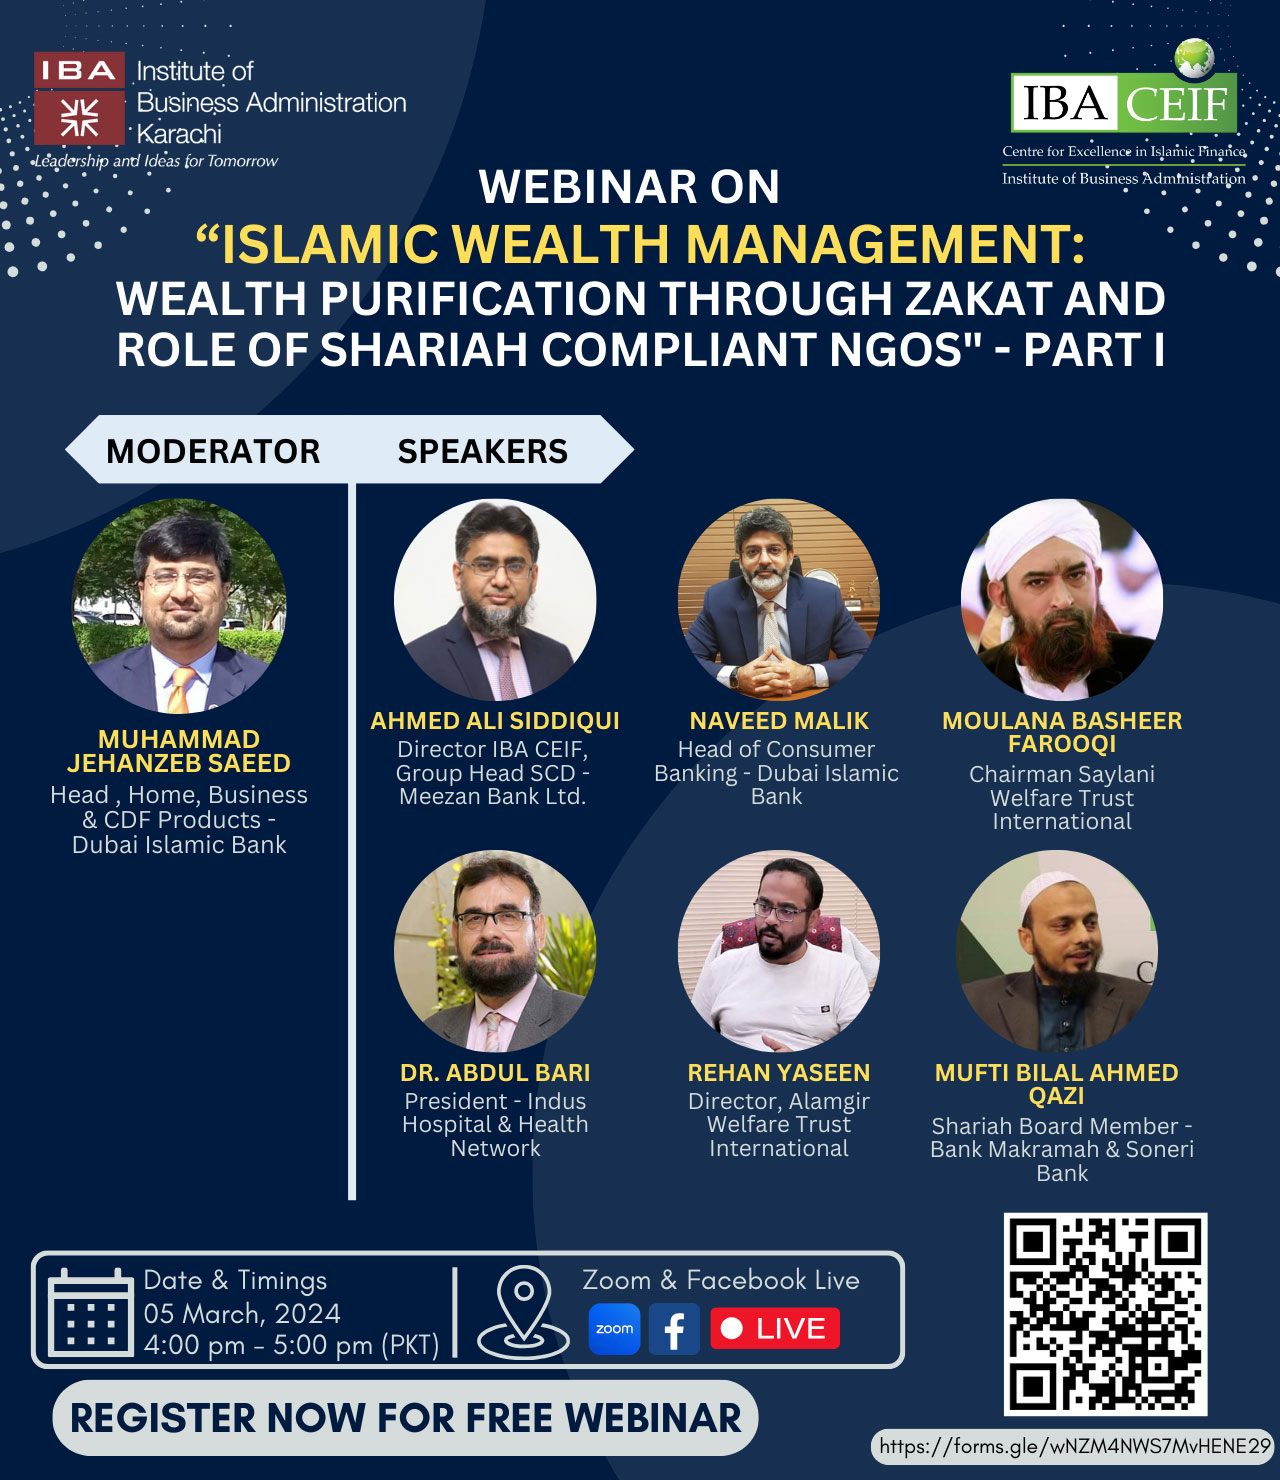 Islamic Wealth Management: Wealth Purification through Zakat & Role of Shariah Compliant NGOs